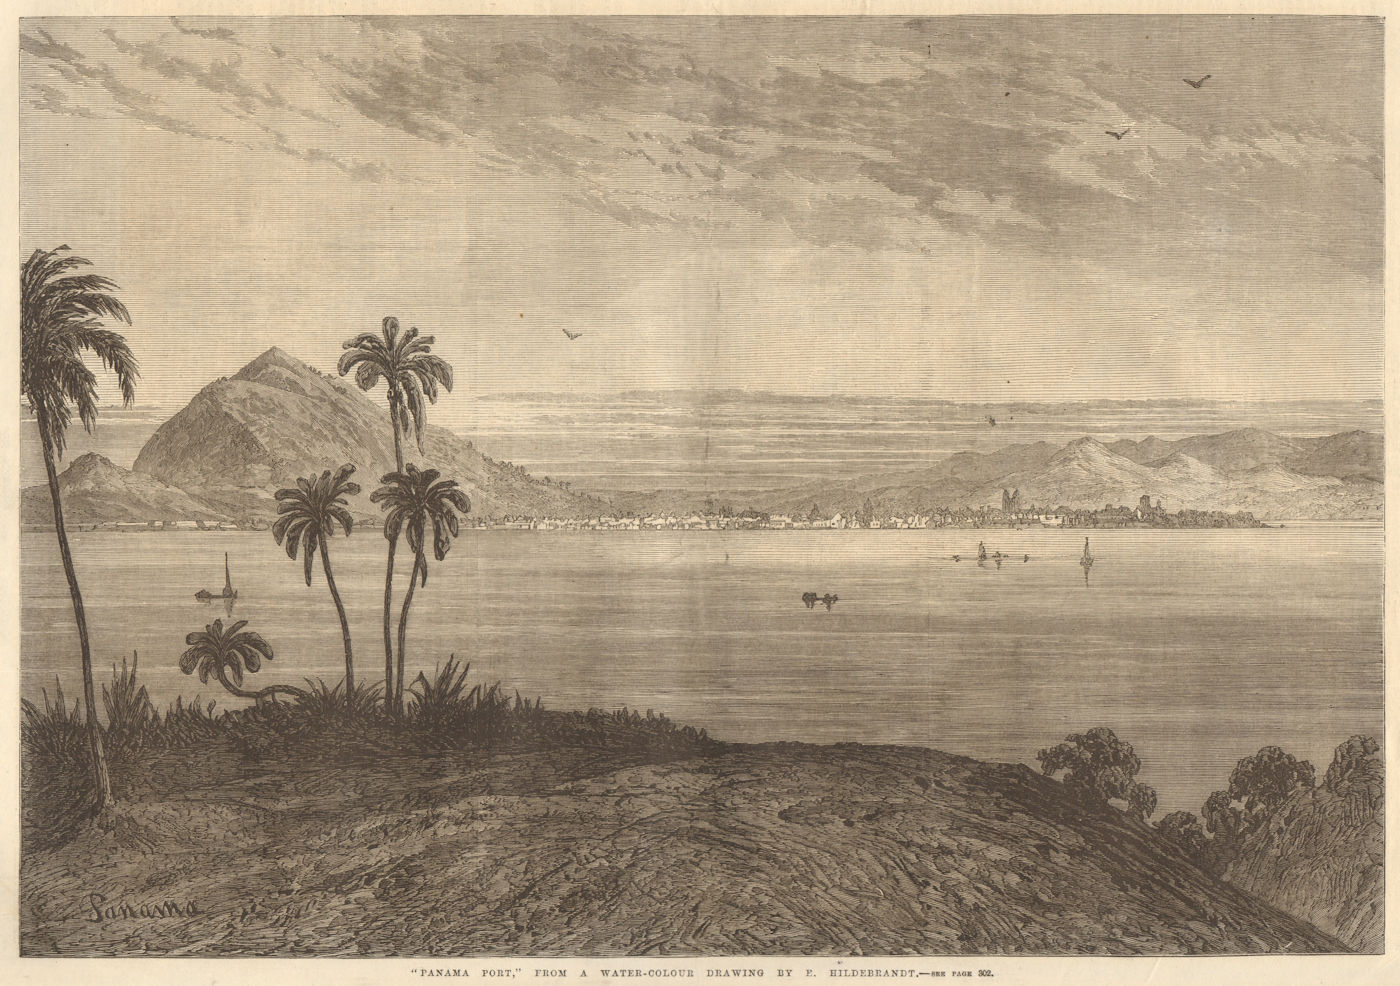 Associate Product "Panama Port" from a water-colour by E. Hildebrandt. Panama City 1868